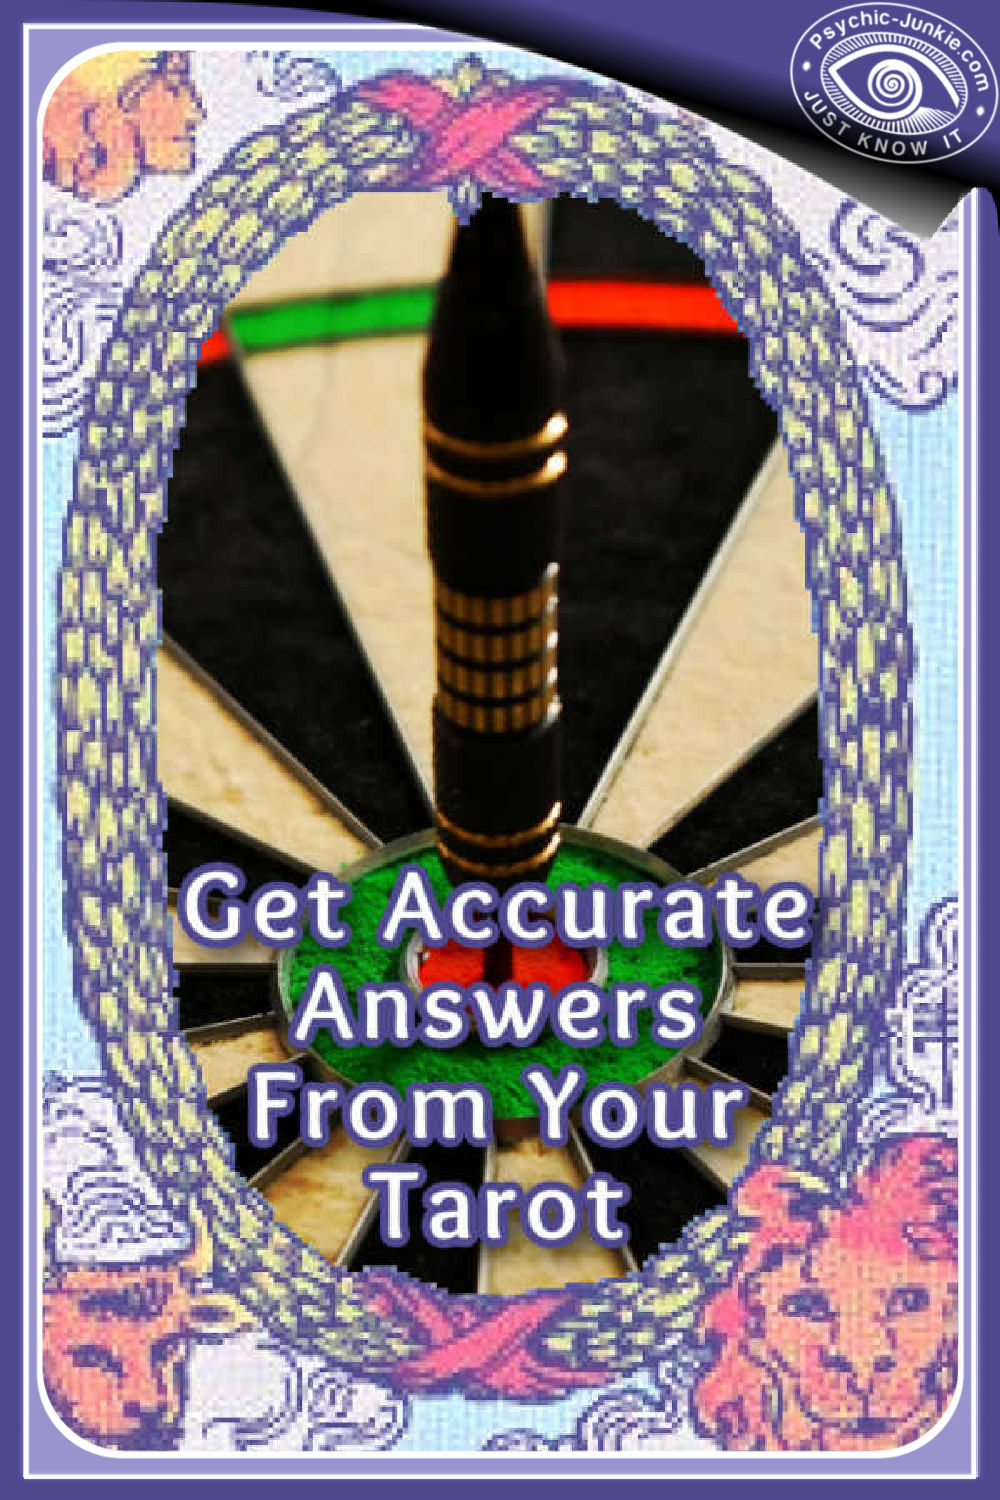 Getting Accurate Answers From The Tarot